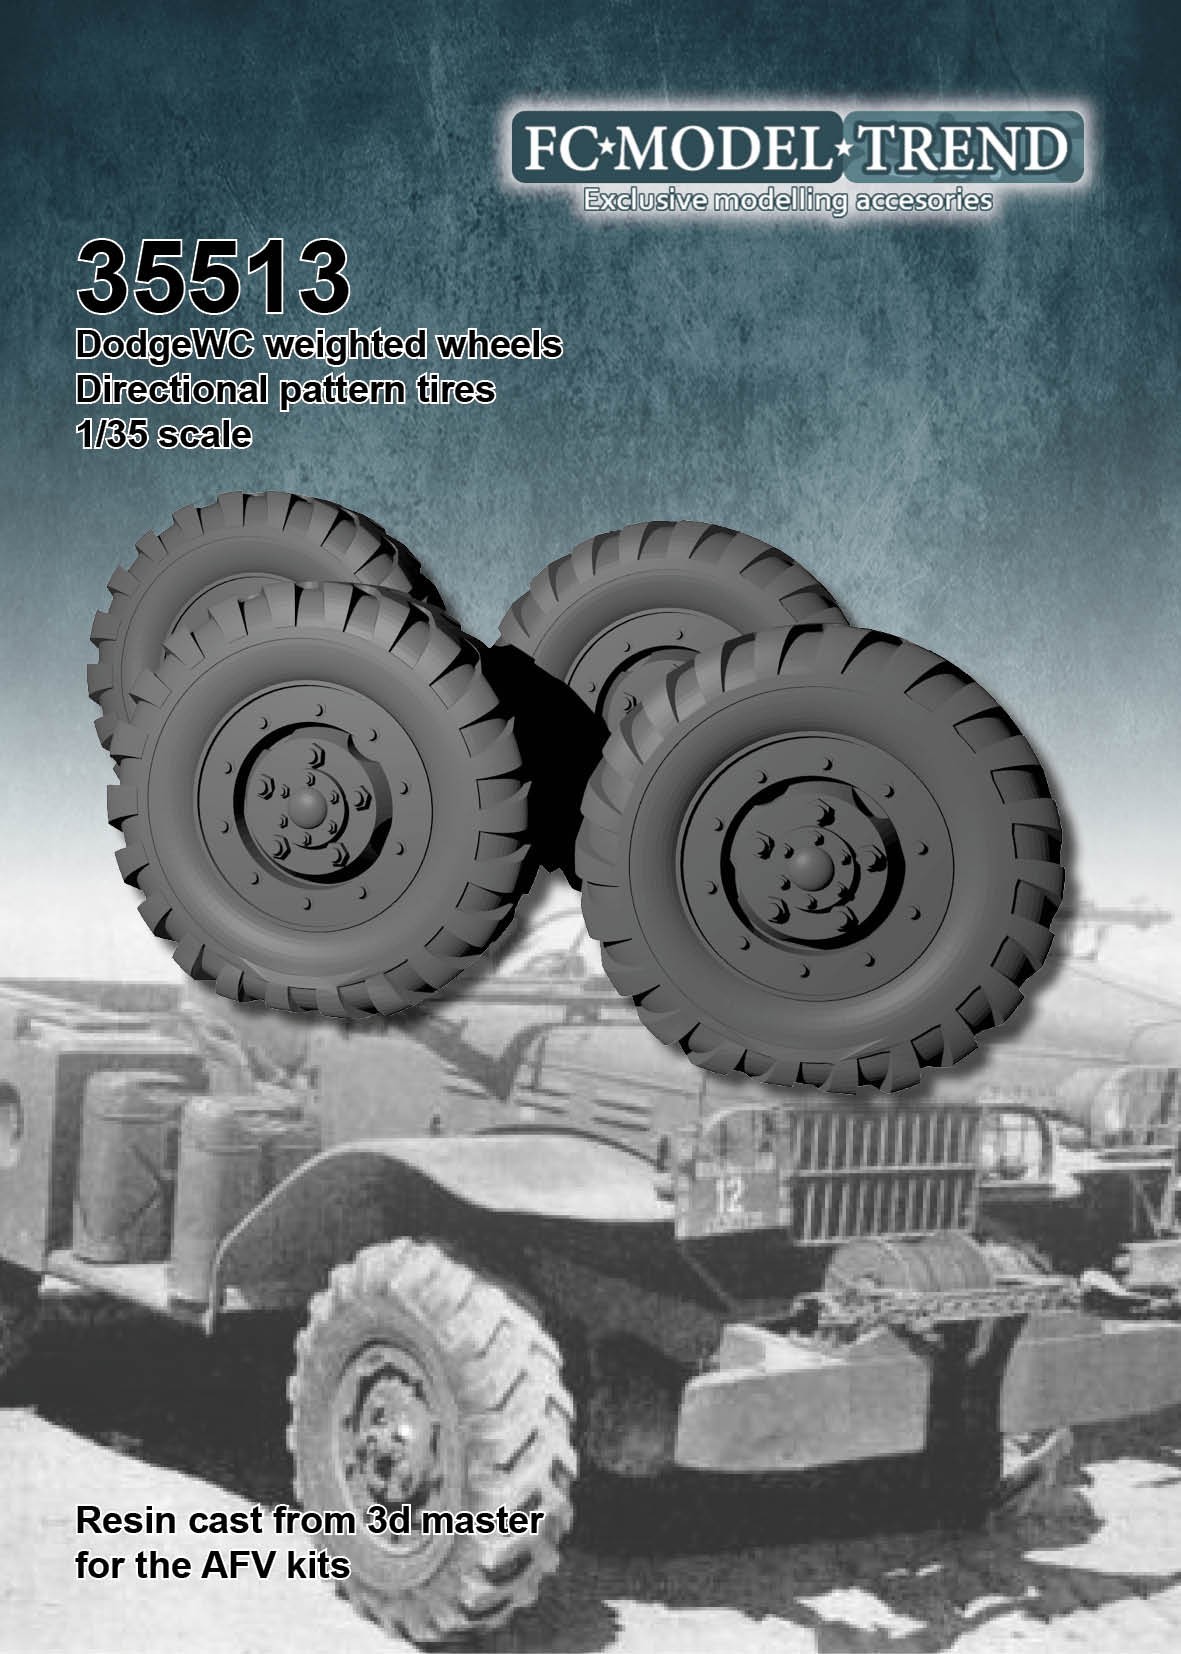 DodgeWC directional pattern tire wheels, resin cast 1/35 scale for the AFV kits.